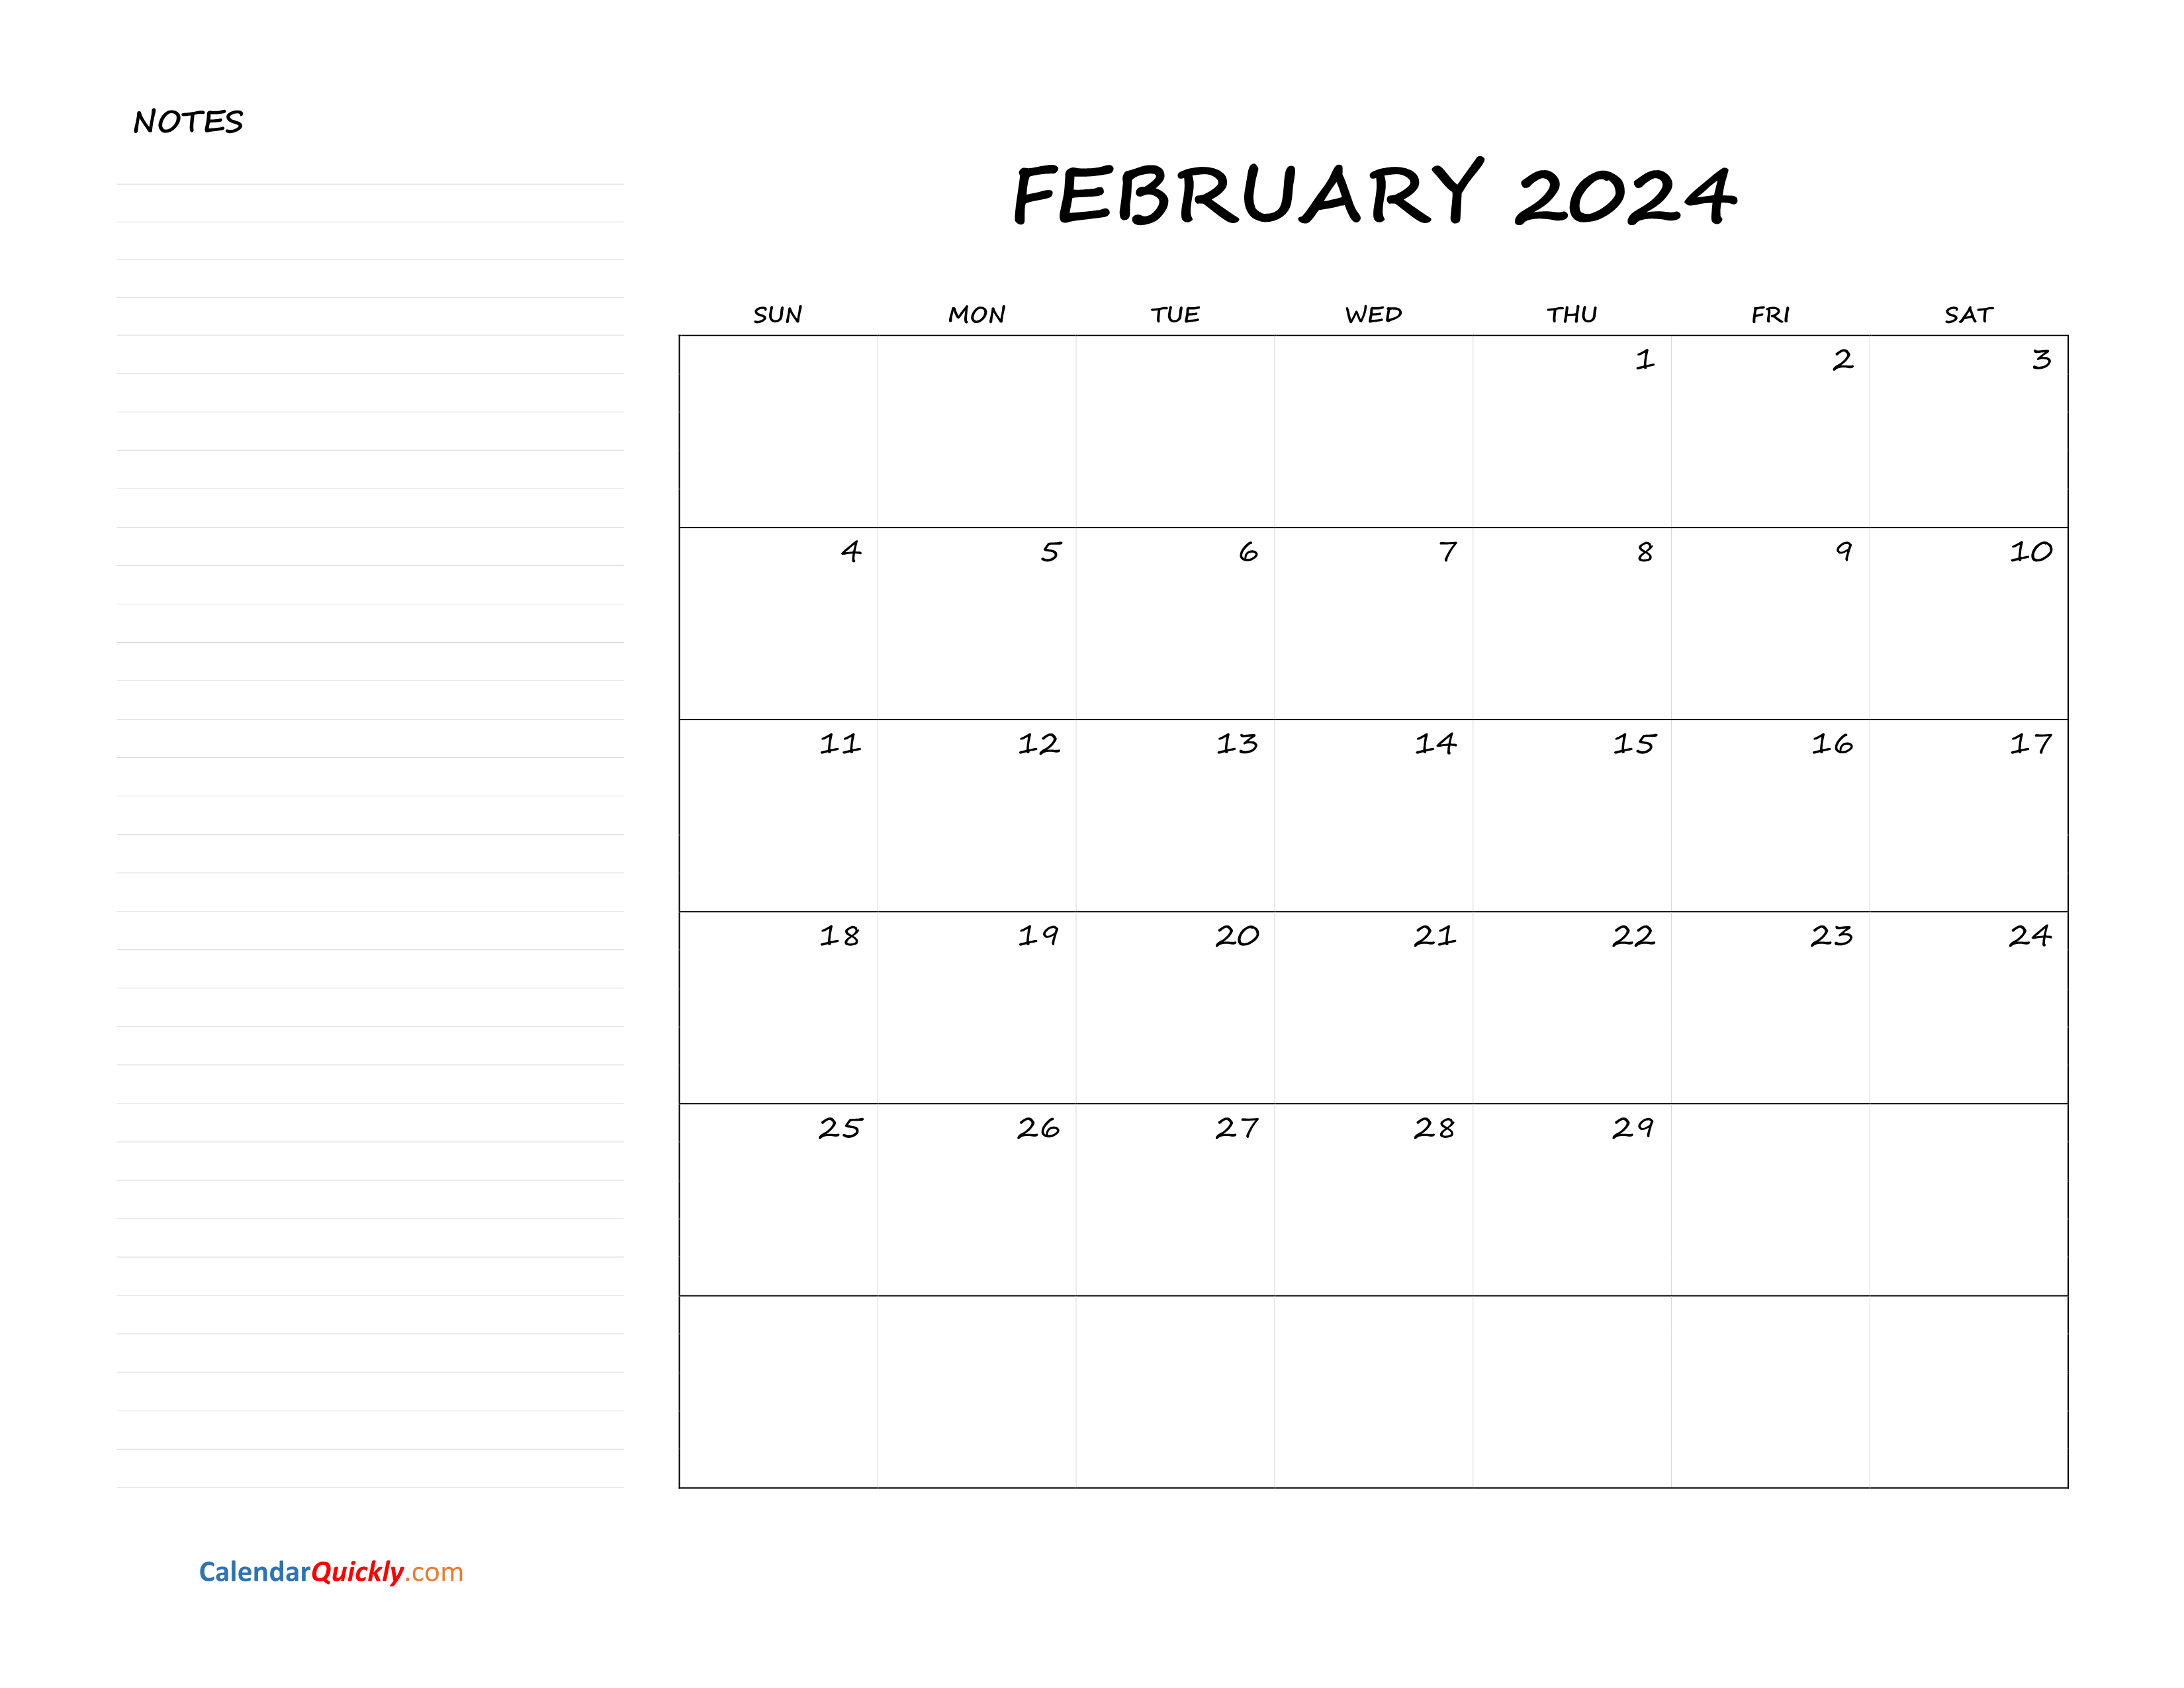 February Blank Calendar 2024 with Notes | Calendar Quickly